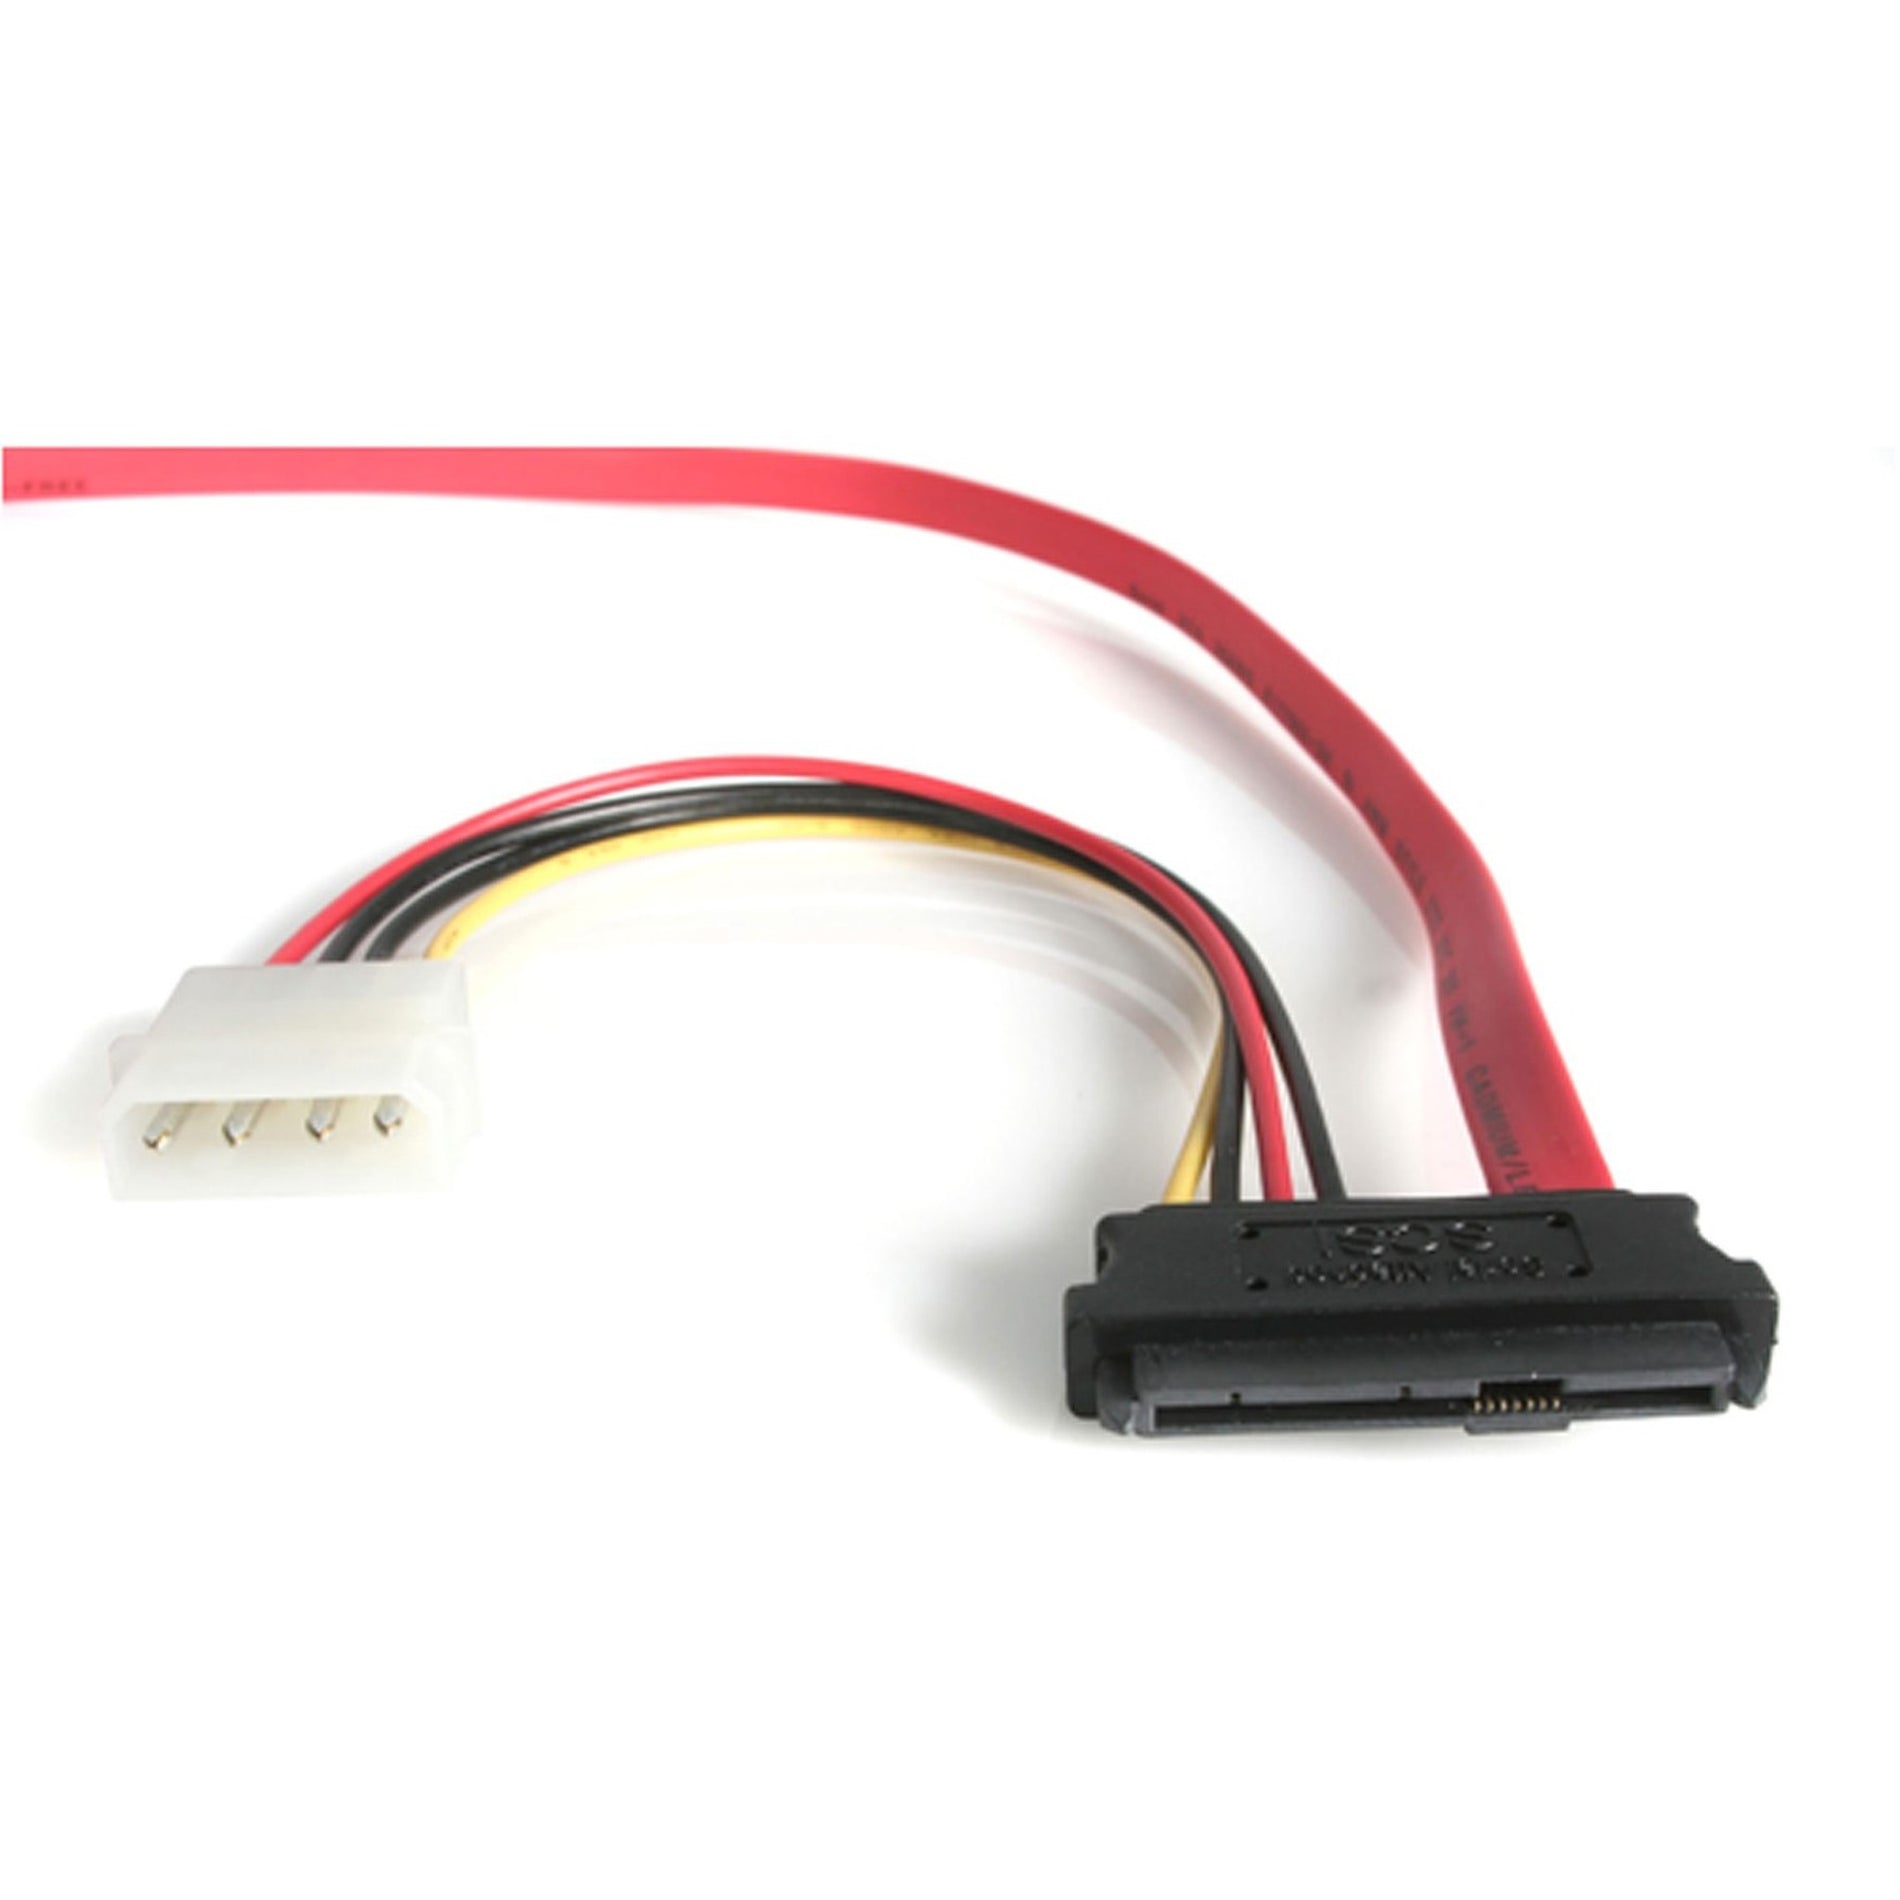 StarTech.com SAS729PW18 18in SAS 29 Pin to SATA Cable with LP4 Power, Faster and More Reliable 3 Gb/s Data Transfer